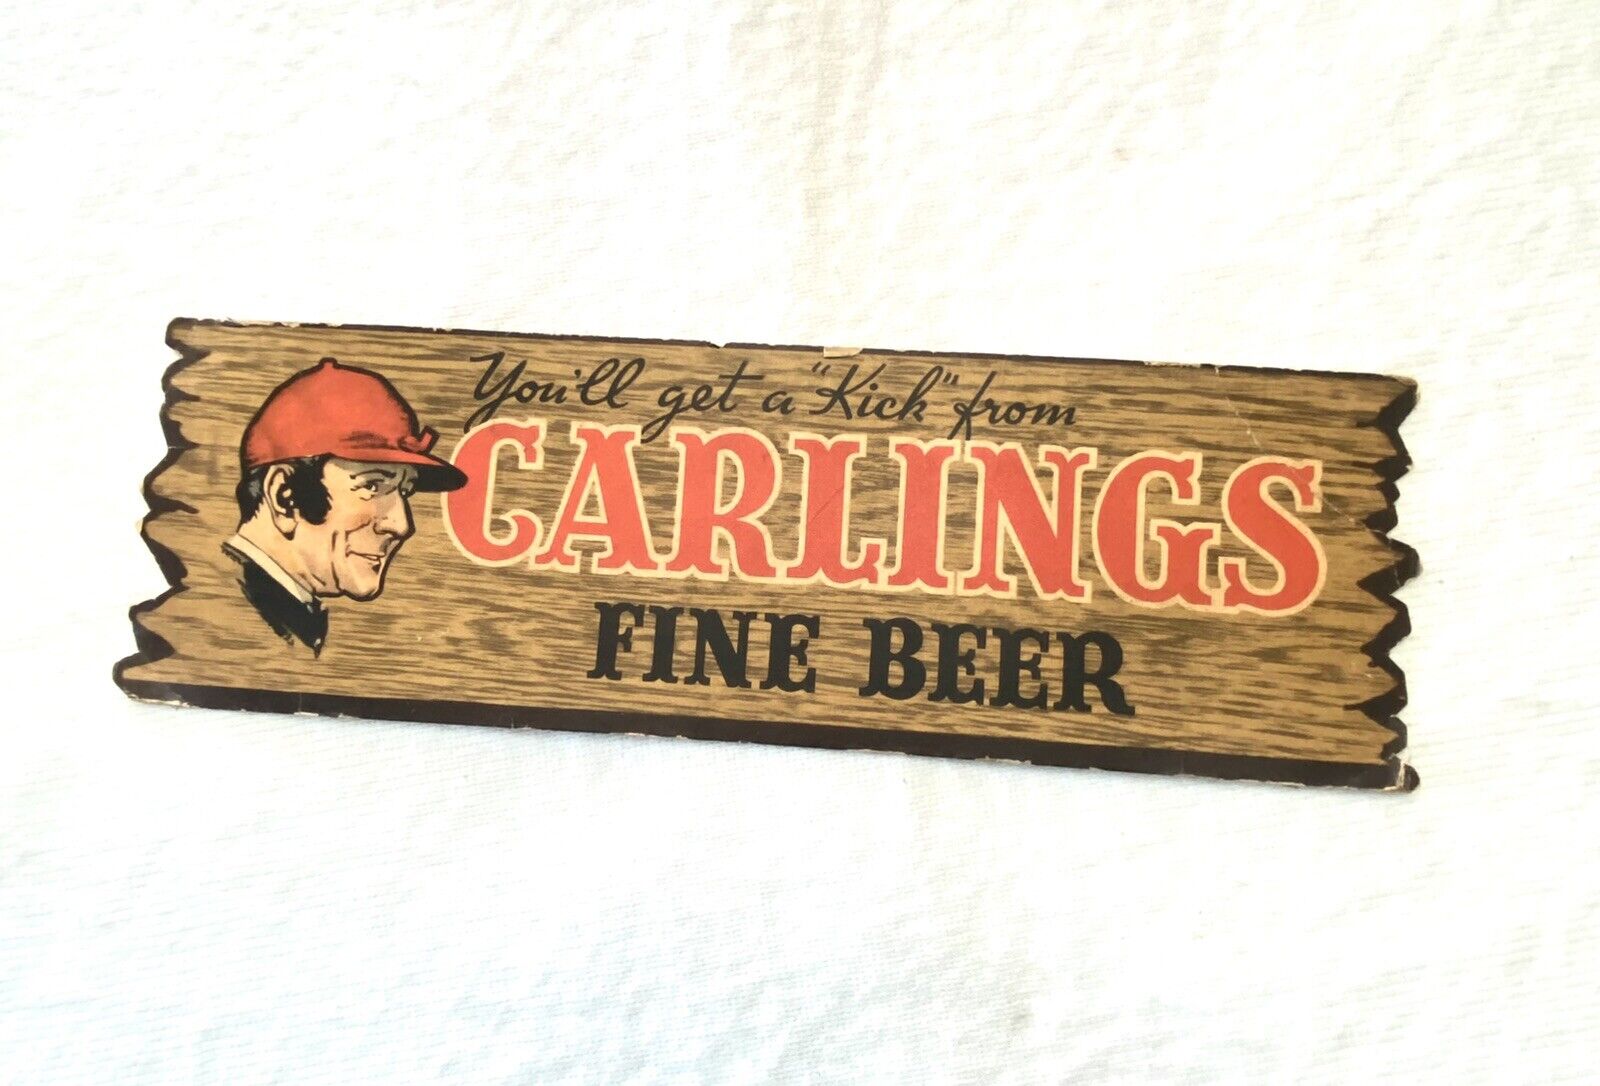 💥Rare Very Early Cardboard “You’ll get a “Kick” from Carlings fine Beer” sign